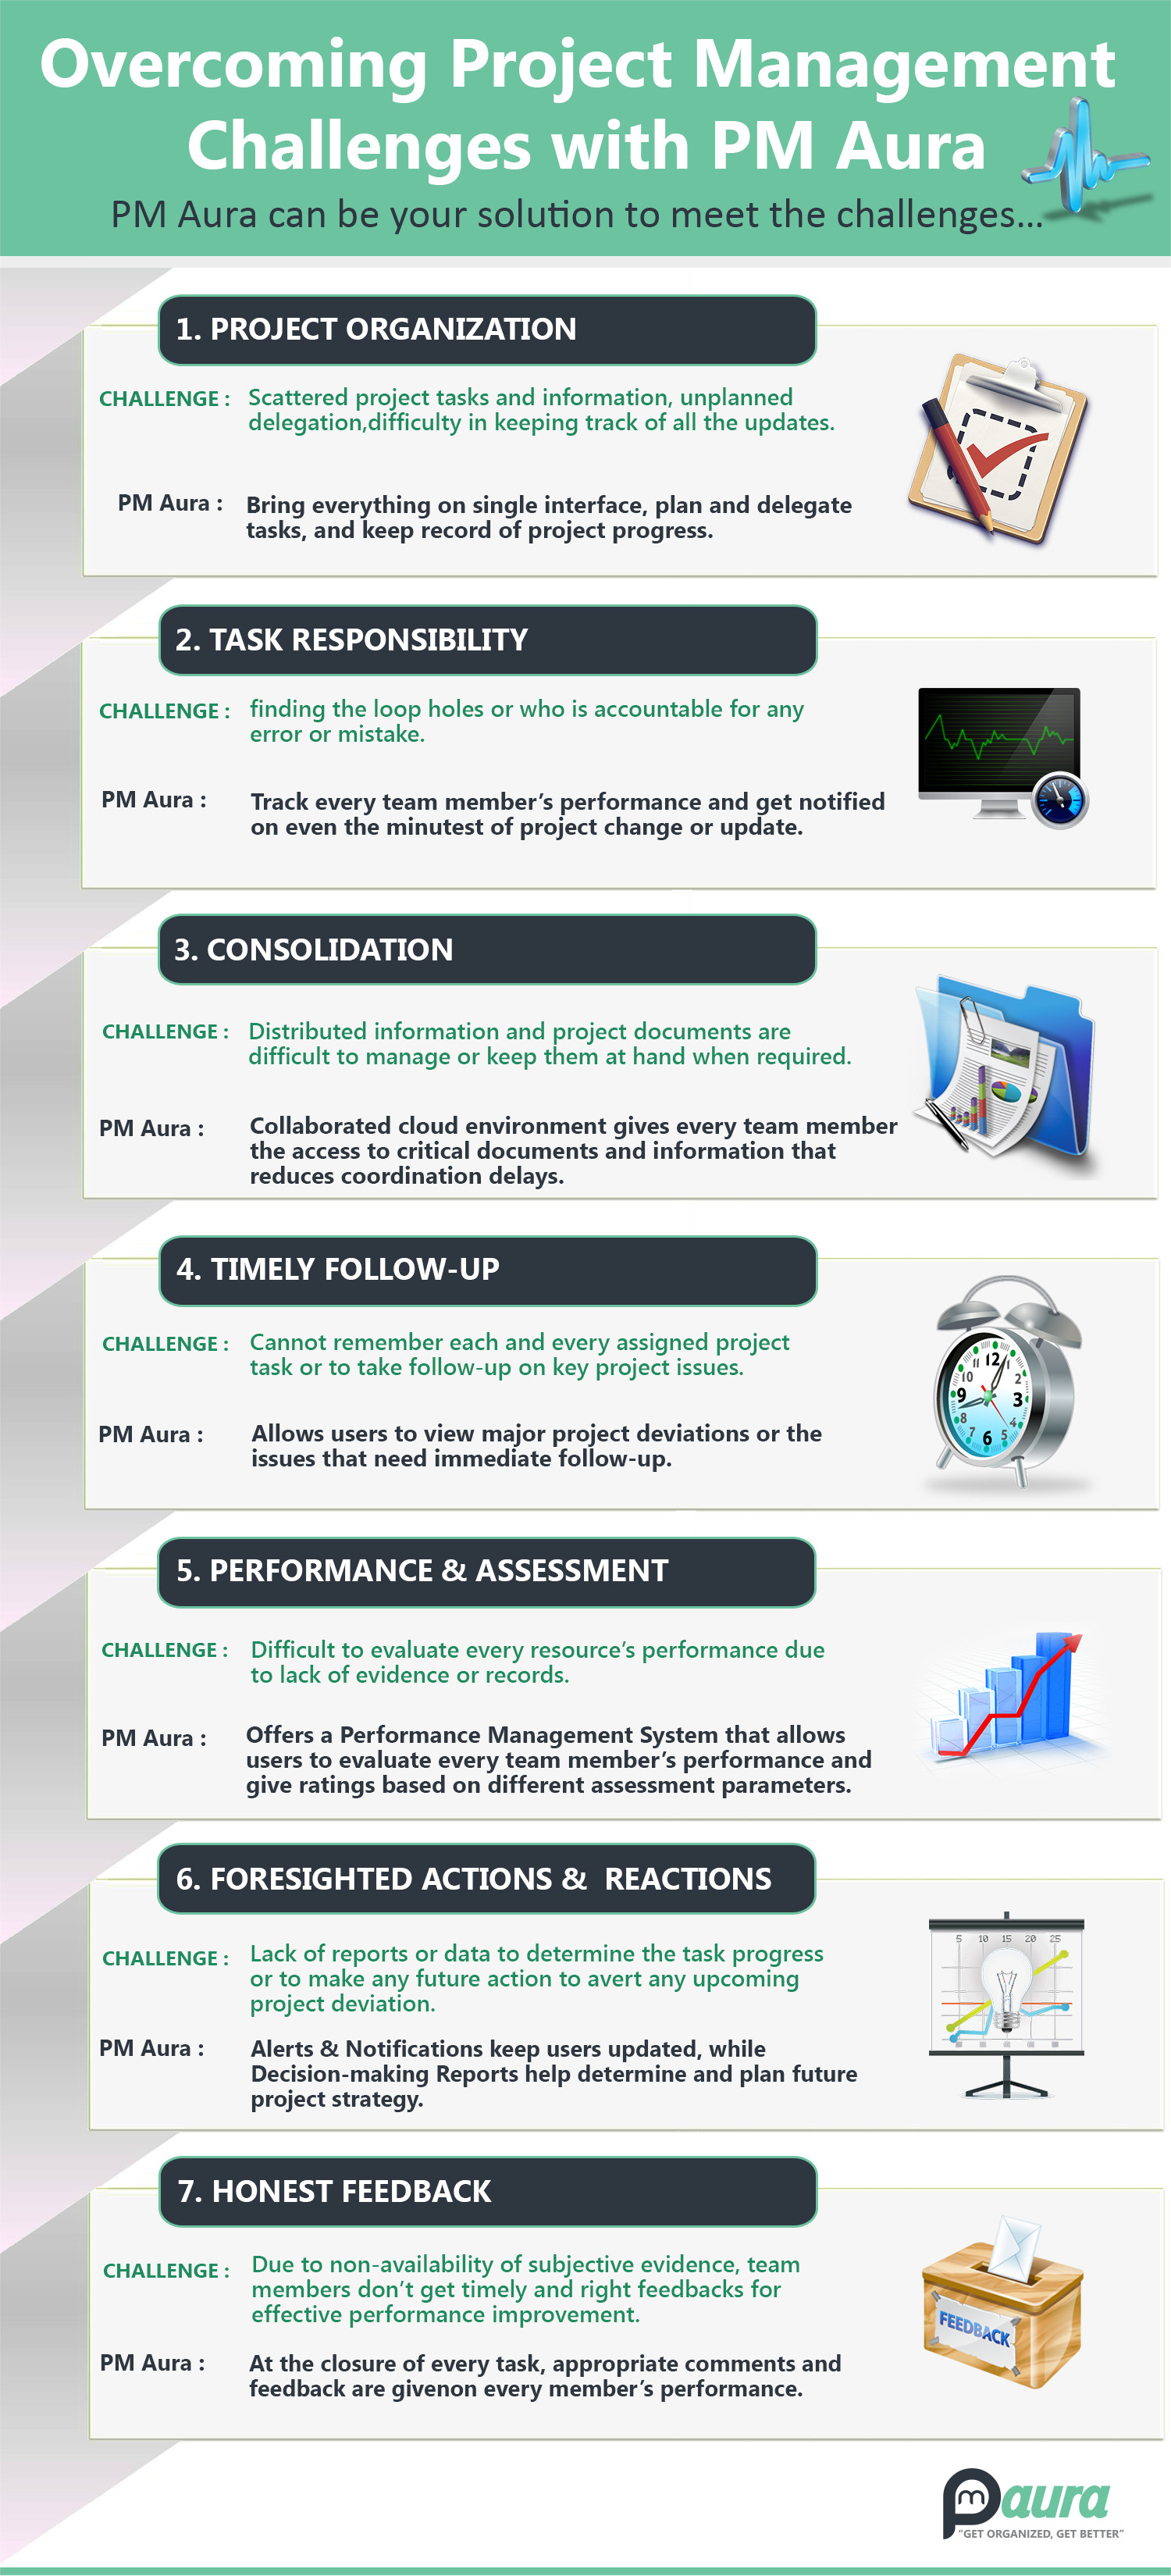 Overcoming Project Management Challenges With PM Aura Infographic